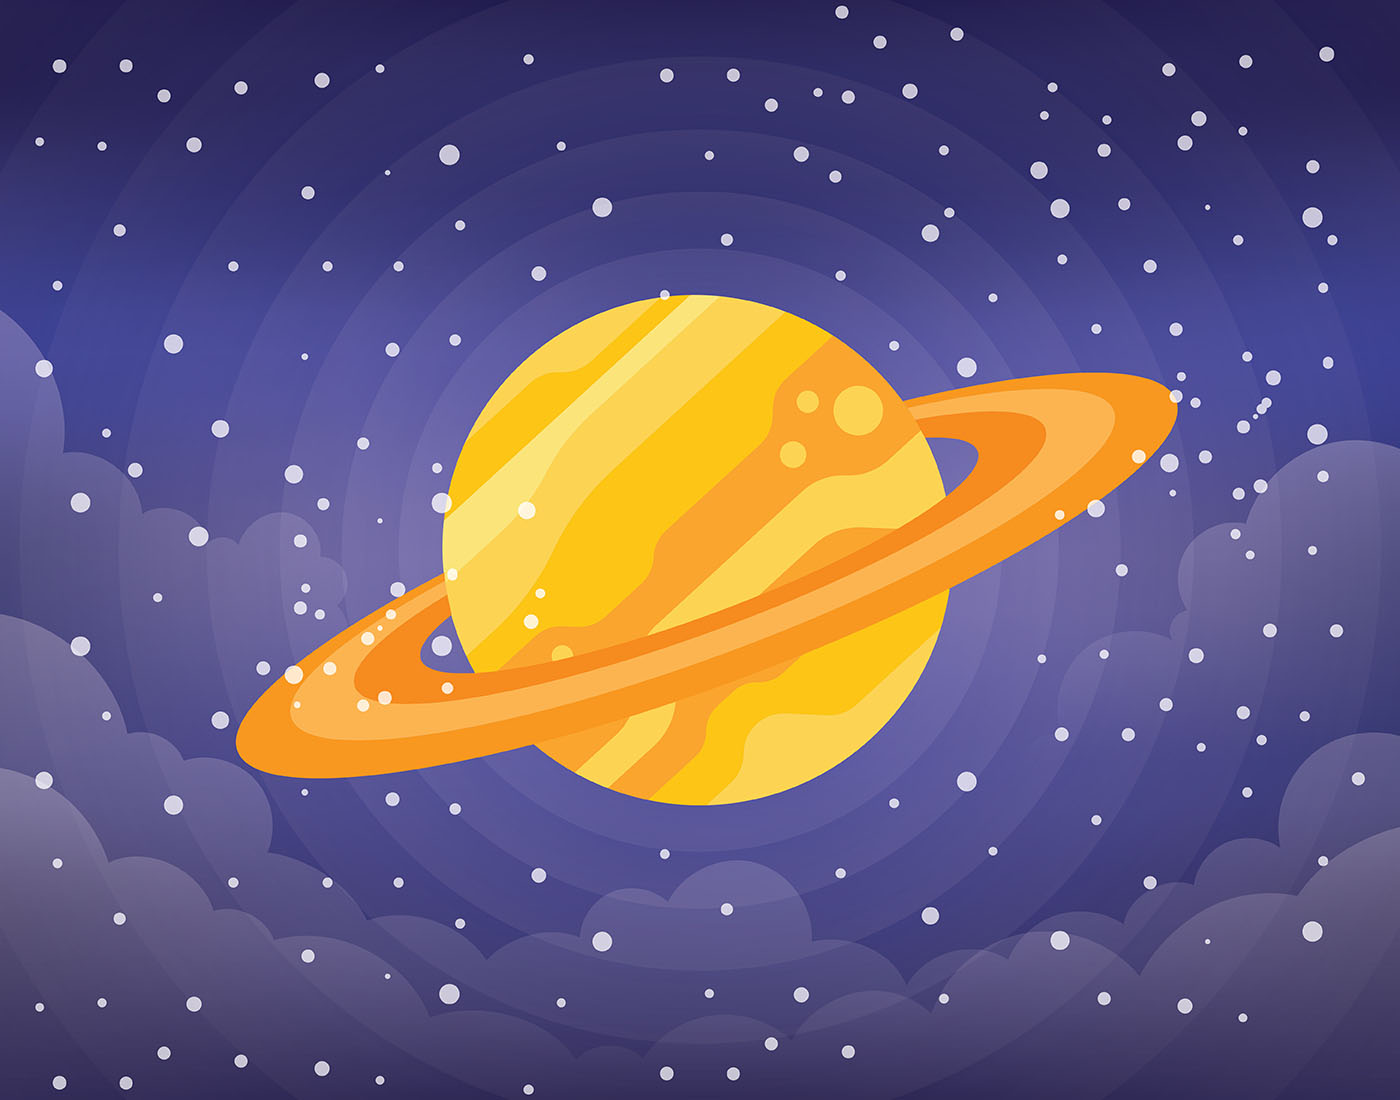 Download this planet saturn doodle vector illustration now. 